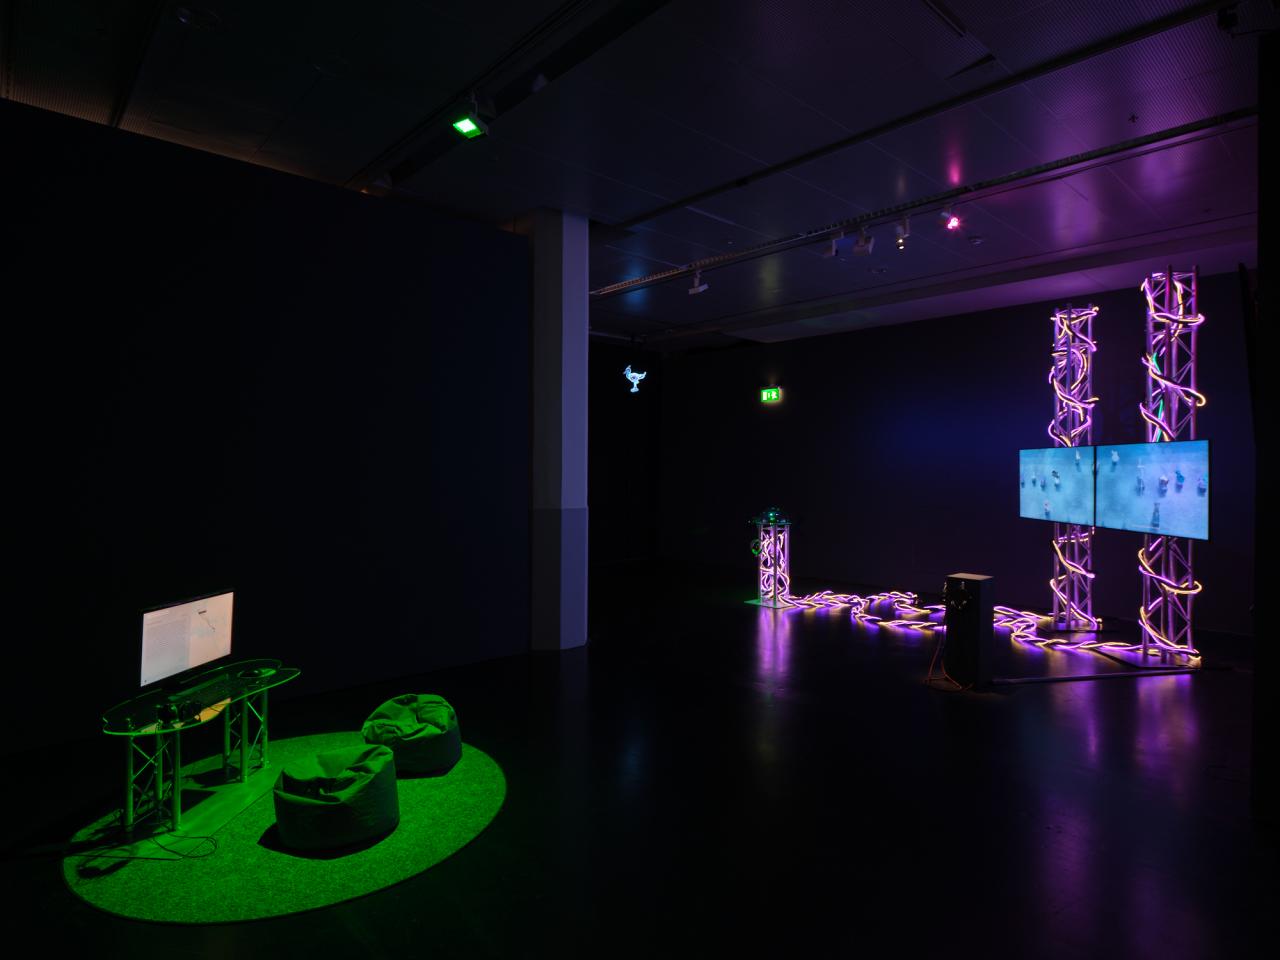 The picture shows a dark room with two works of art in the middle. On the left is a green-lit space with a computer and two beanbags and on the right is an installation with two screens surrounded by light elements. 